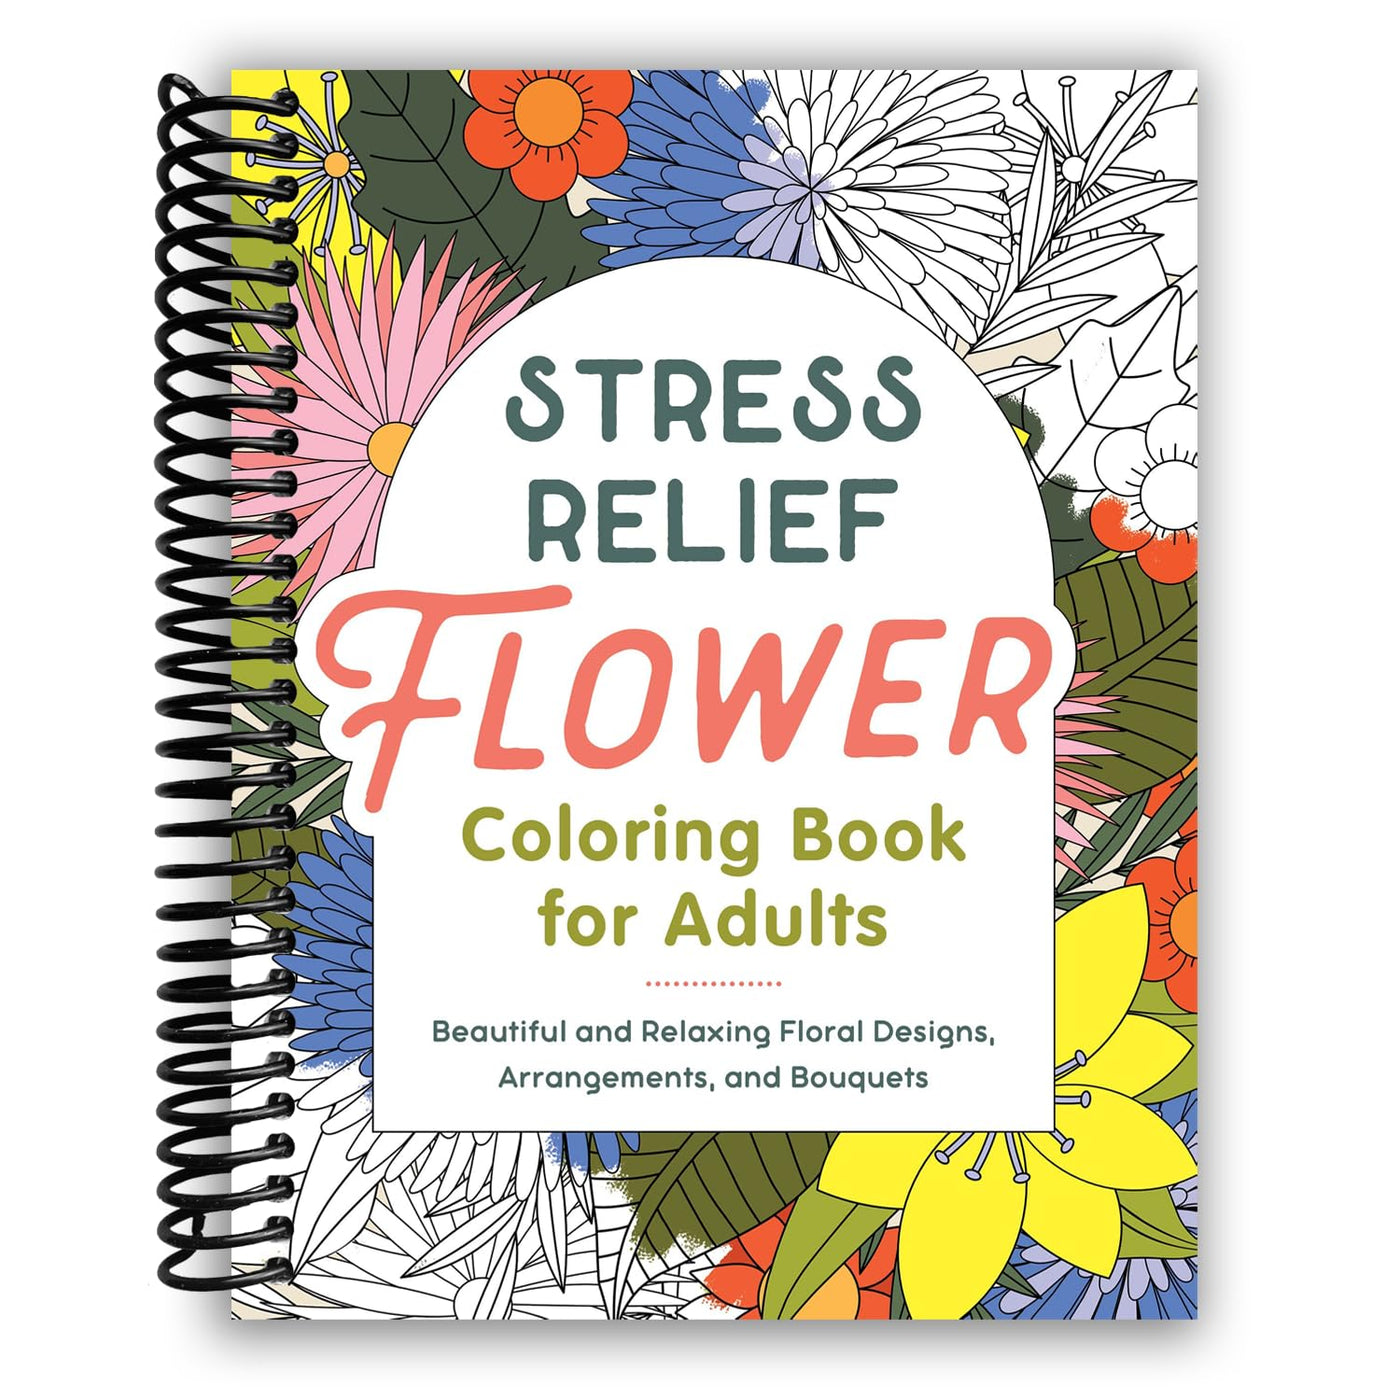 Stress Relief Flower Coloring Book for Adults (Spiral Bound)